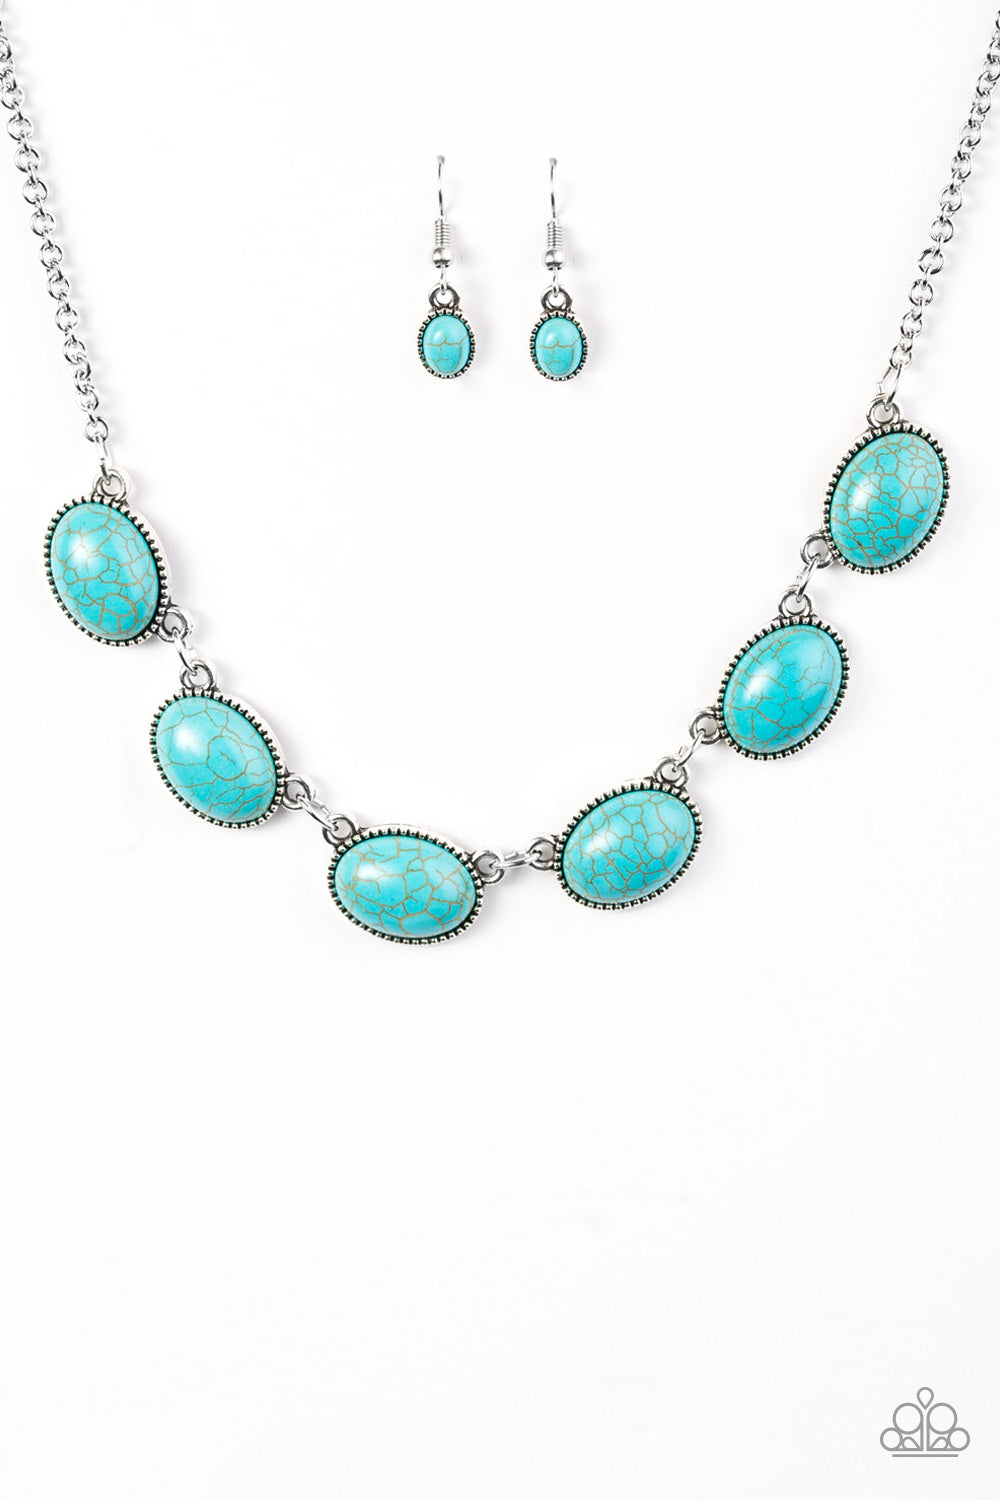 RIVER SONG - TURQUOISE NECKLACE